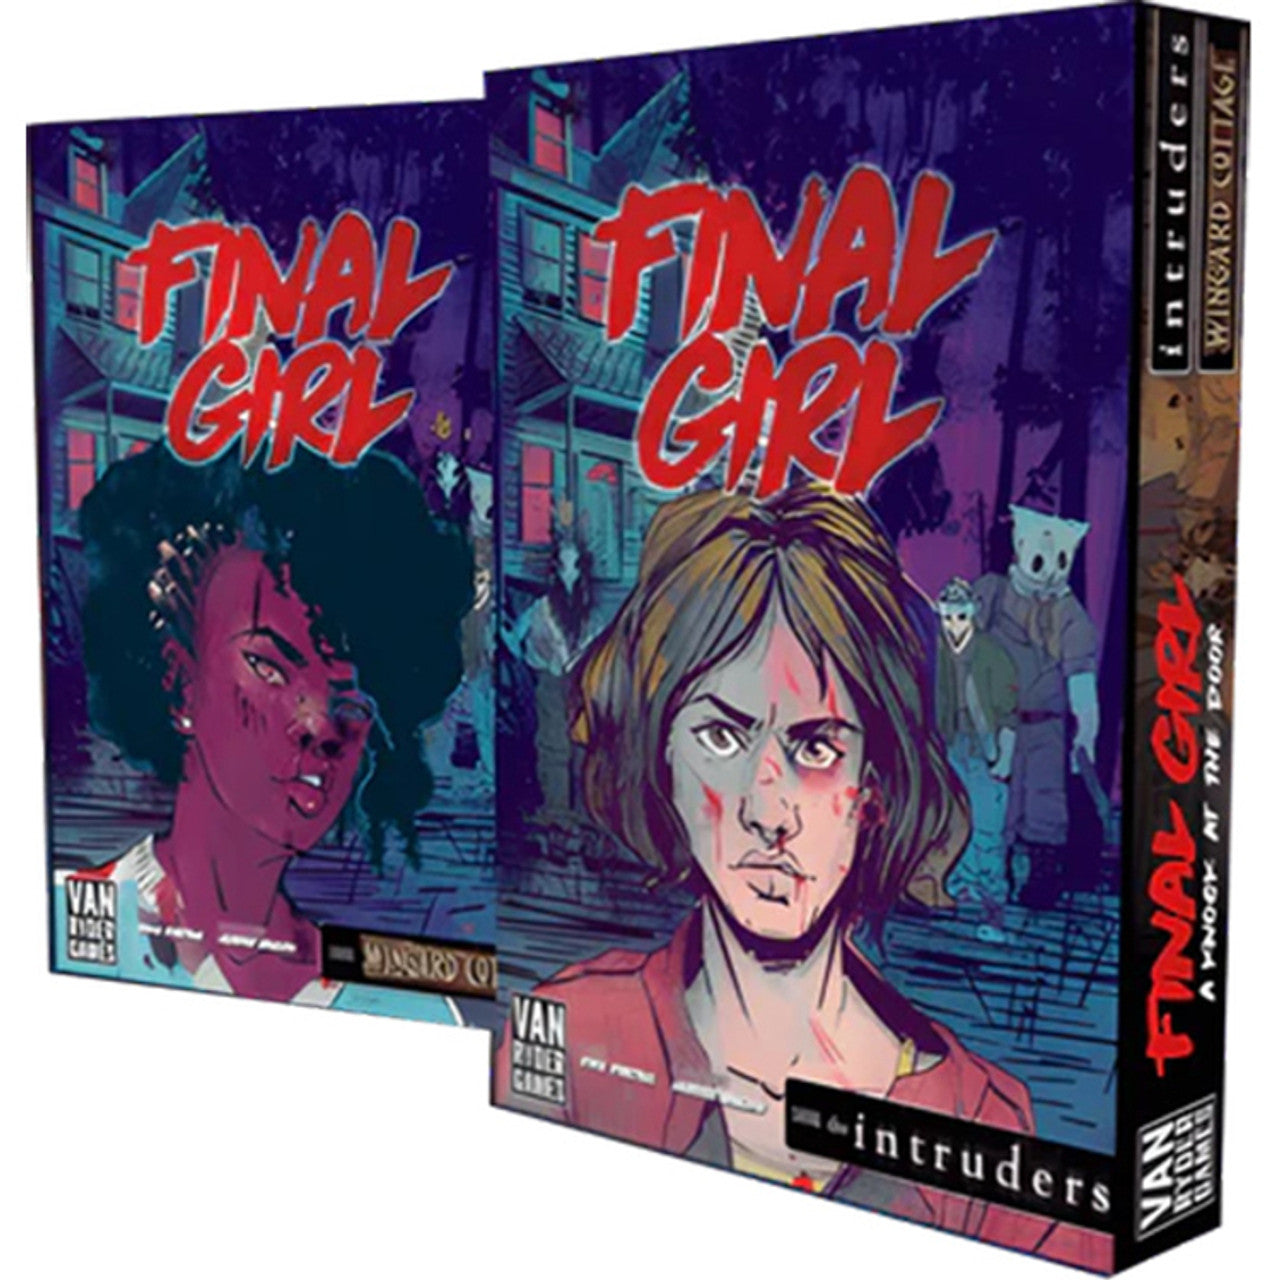 (BSG Certified USED) Final Girl: Series 2 - A Knock at the Door